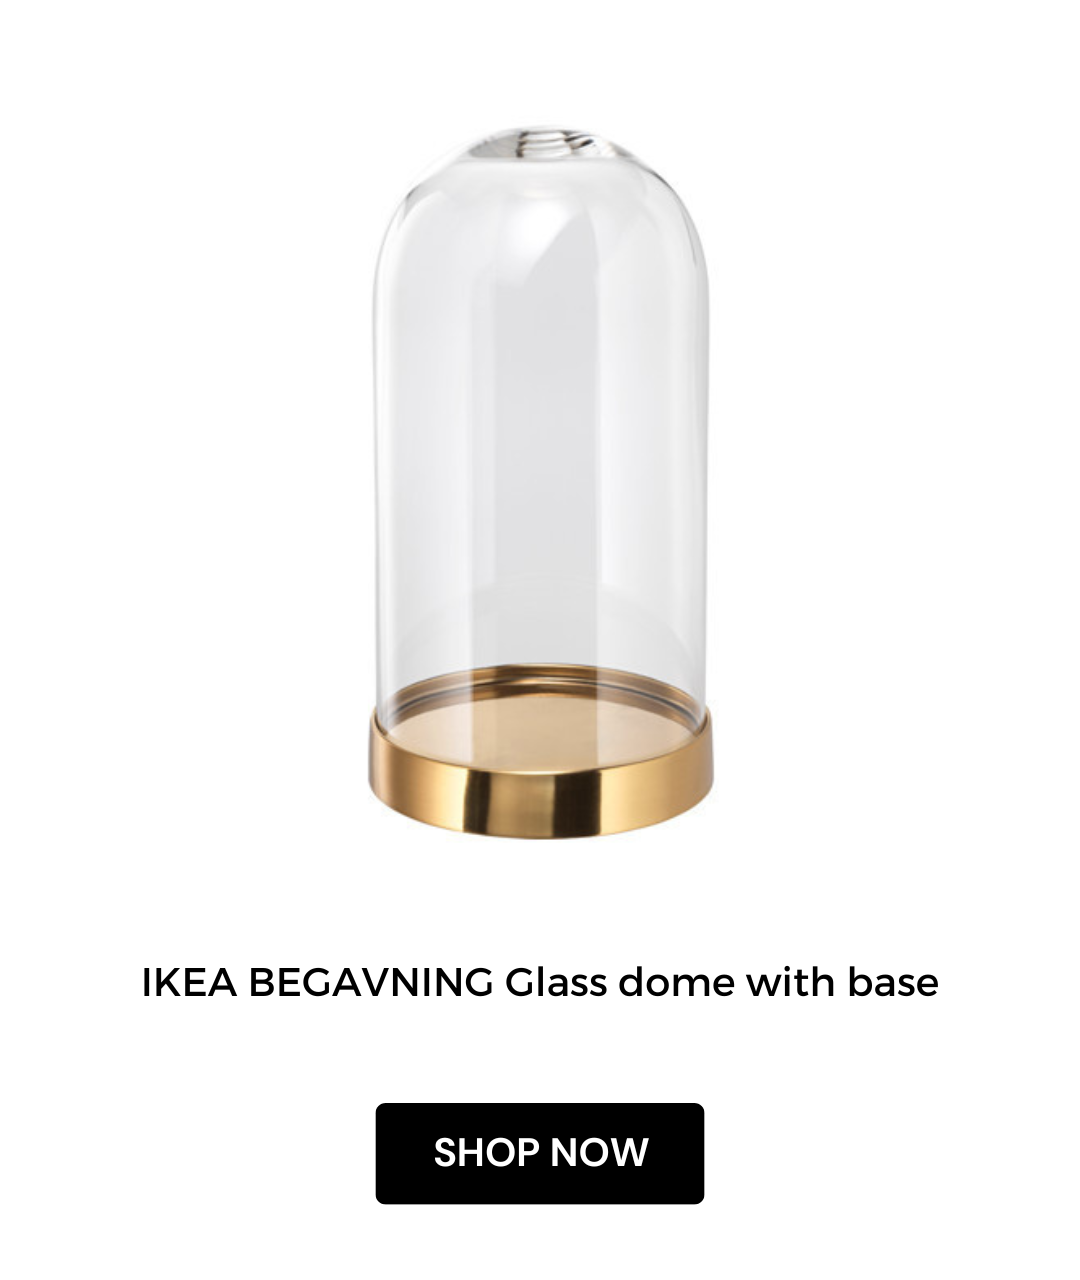 IKEA BEGAVNING Glass dome with base